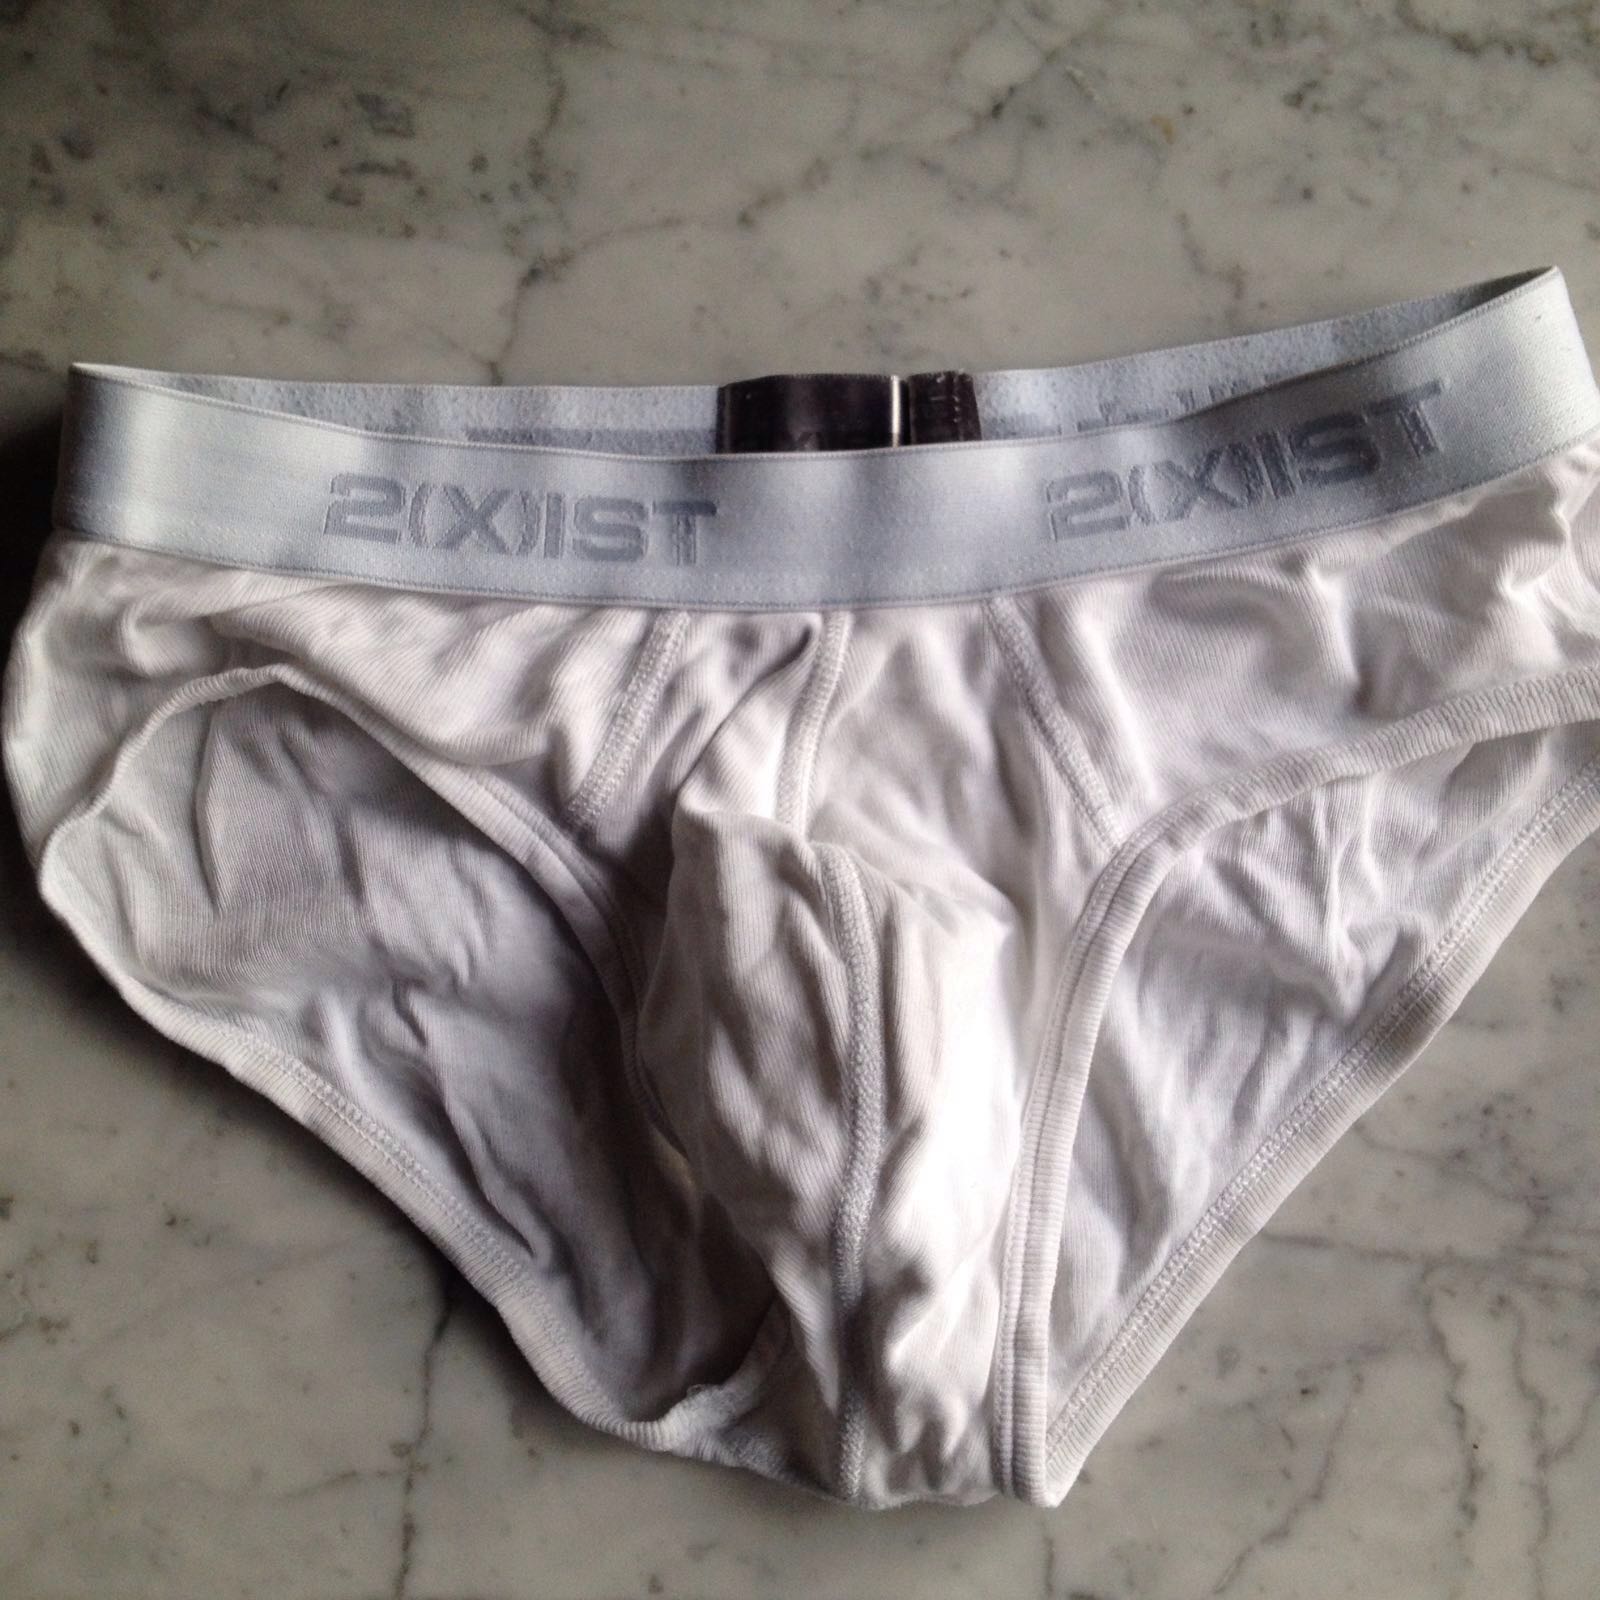 Marks briefs on X: Used briefs for sale. Can be customised #briefs  #usedbriefs #2xist   / X